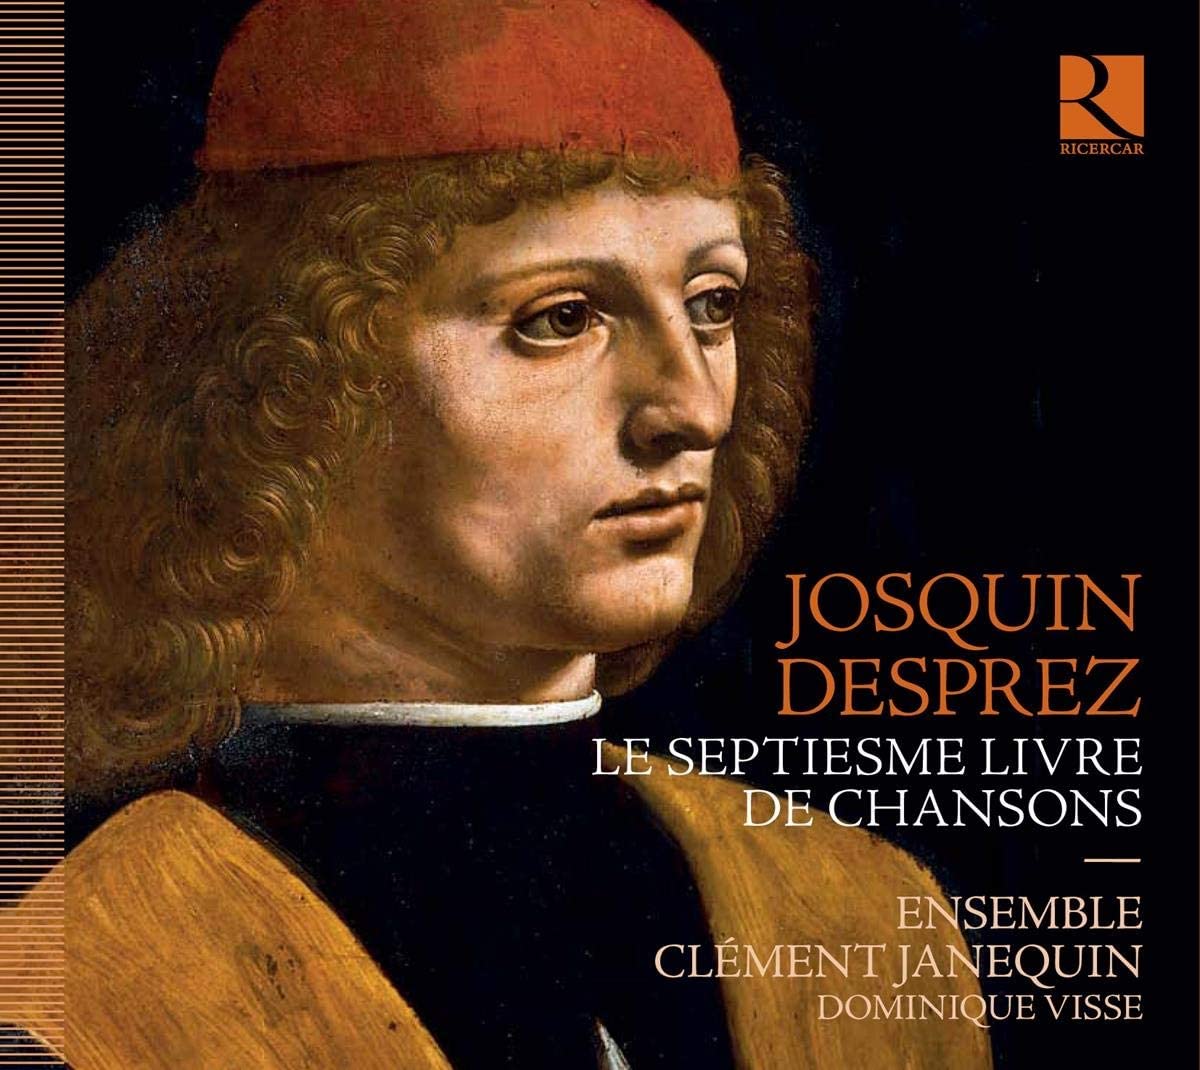 CD cover of Josquin 7th book of chansons on Ricercar Dominique Visse